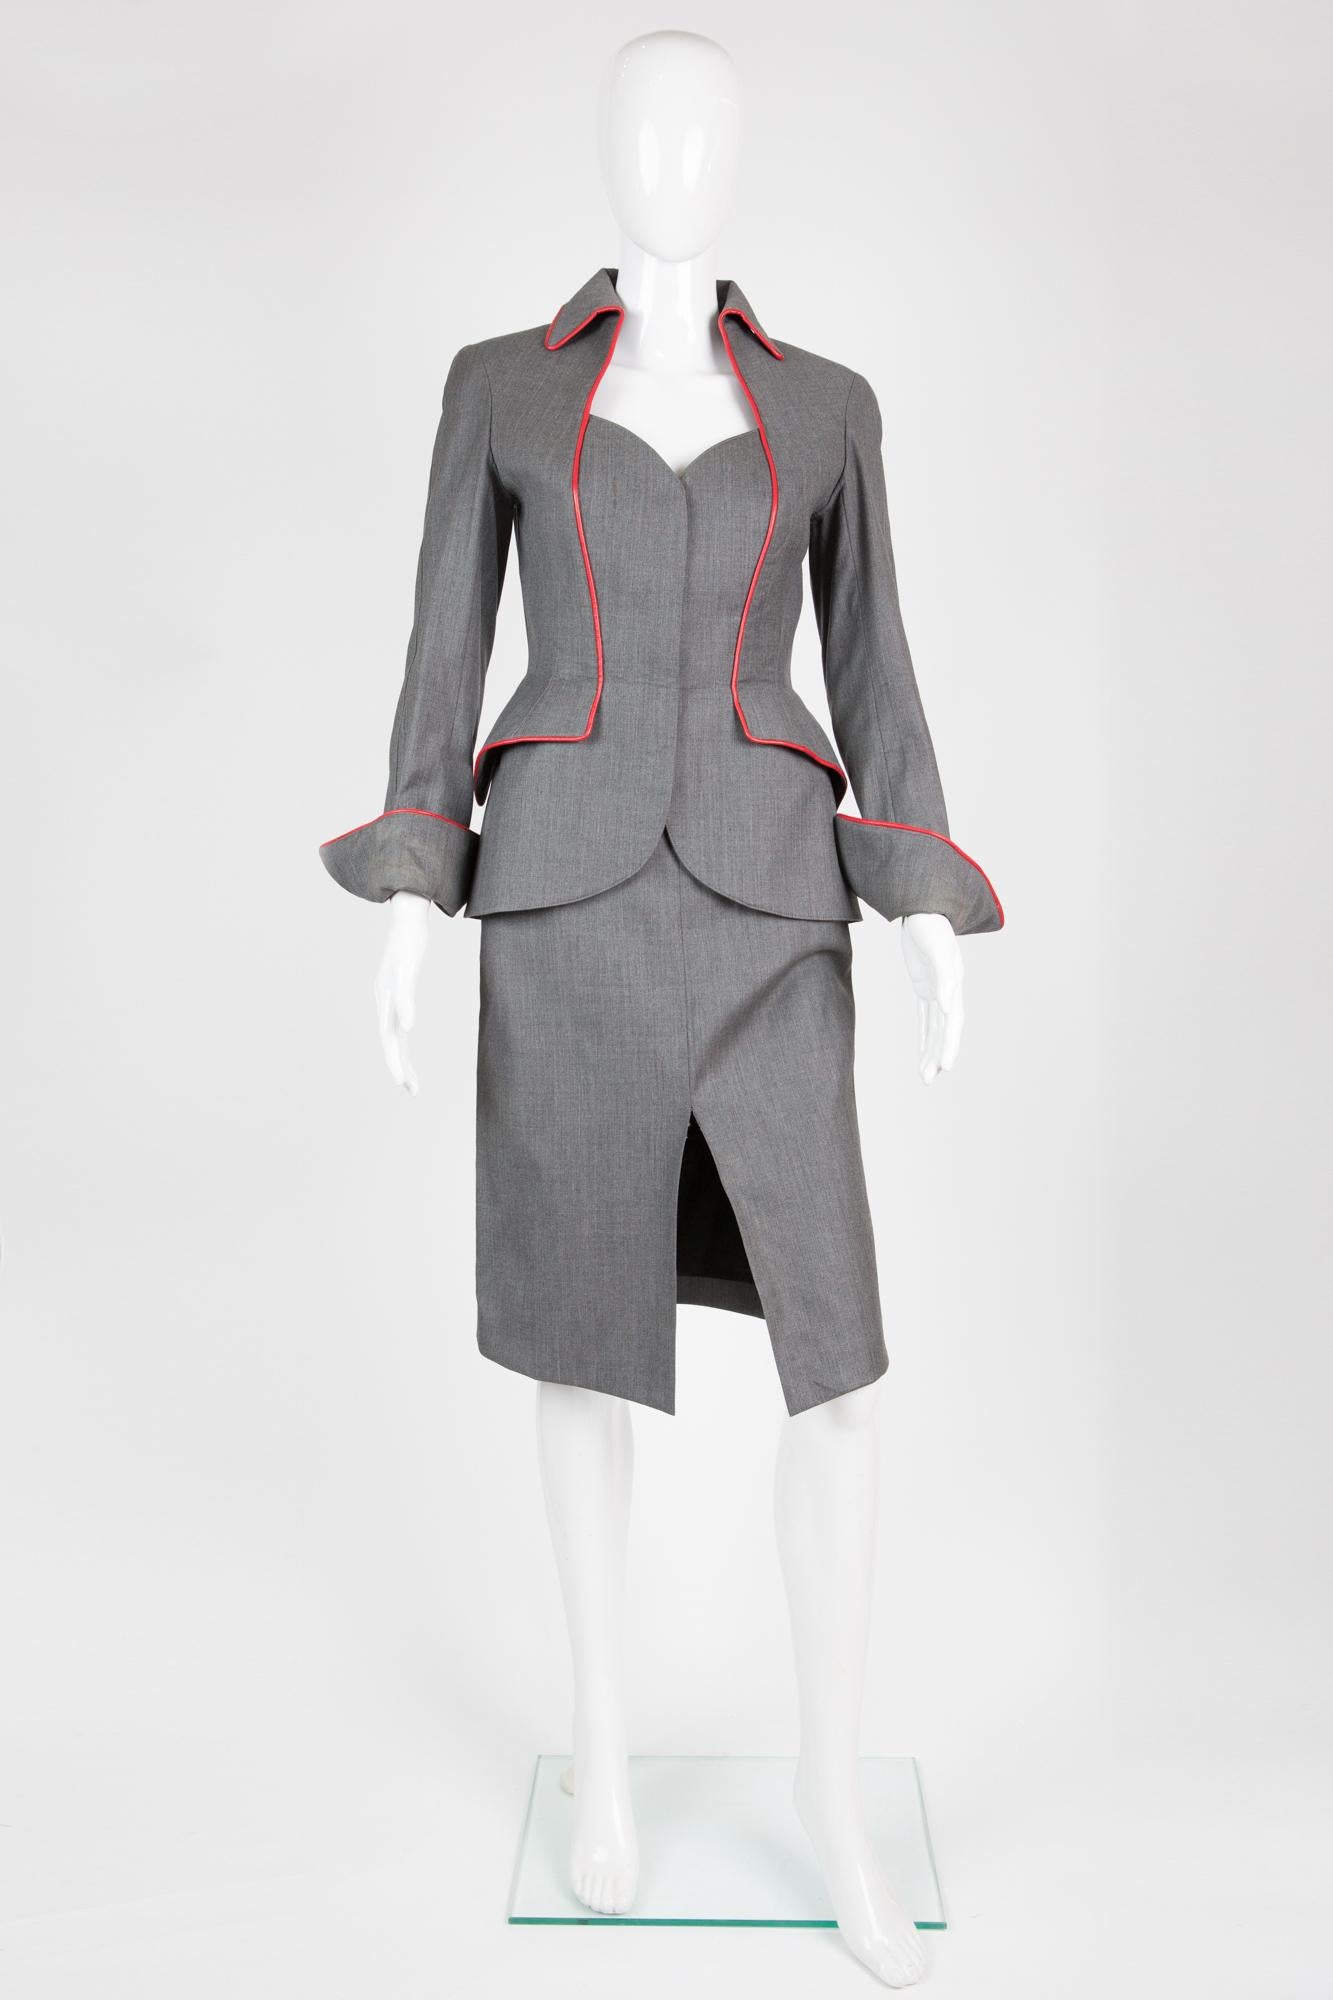 Thierry Mugler Couture grey and red suit featuring an iconic fitted jacket with shoulder pads, front snaps buttons, red leather piping details, fancy cuffs details, a red lining, and a fitted pencil skirt with front pockets, a waistband detail, a